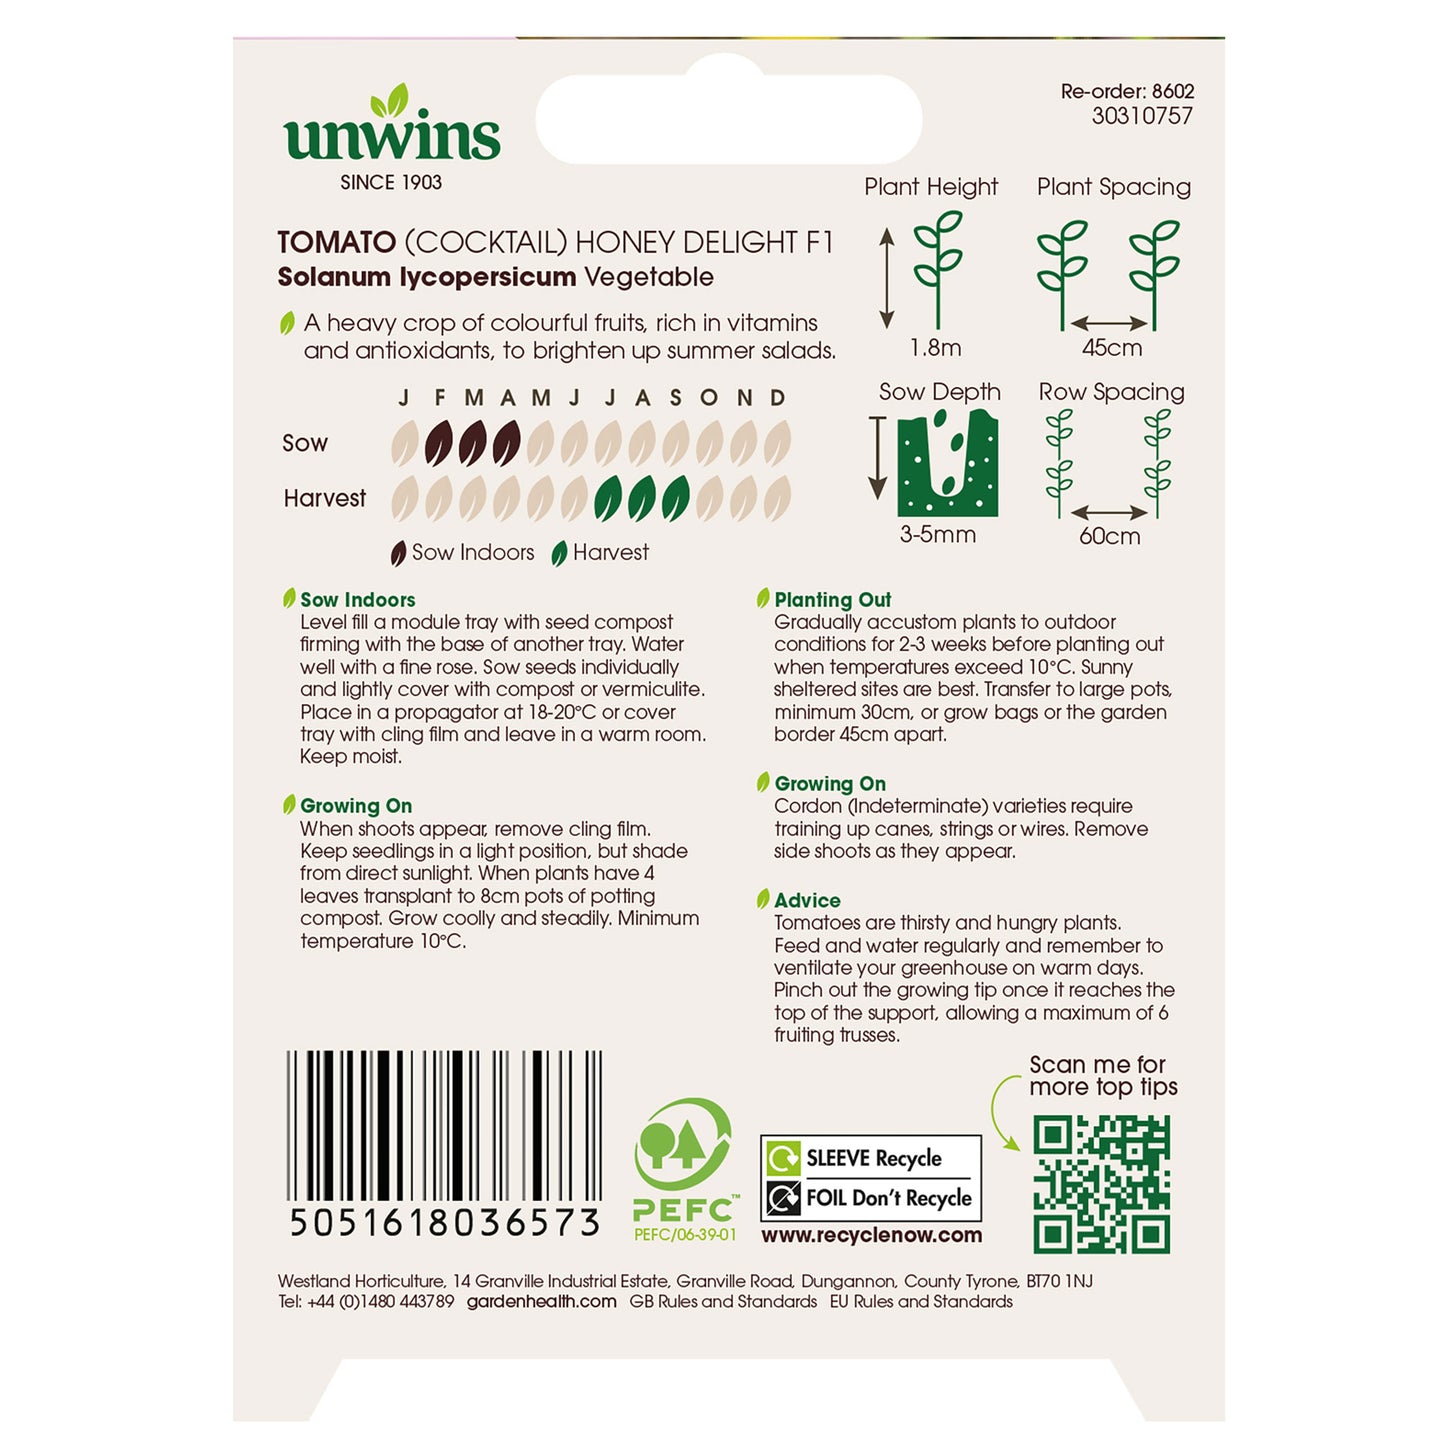 Unwins Cocktail Tomato Honey Delight F1 Seeds back of pack